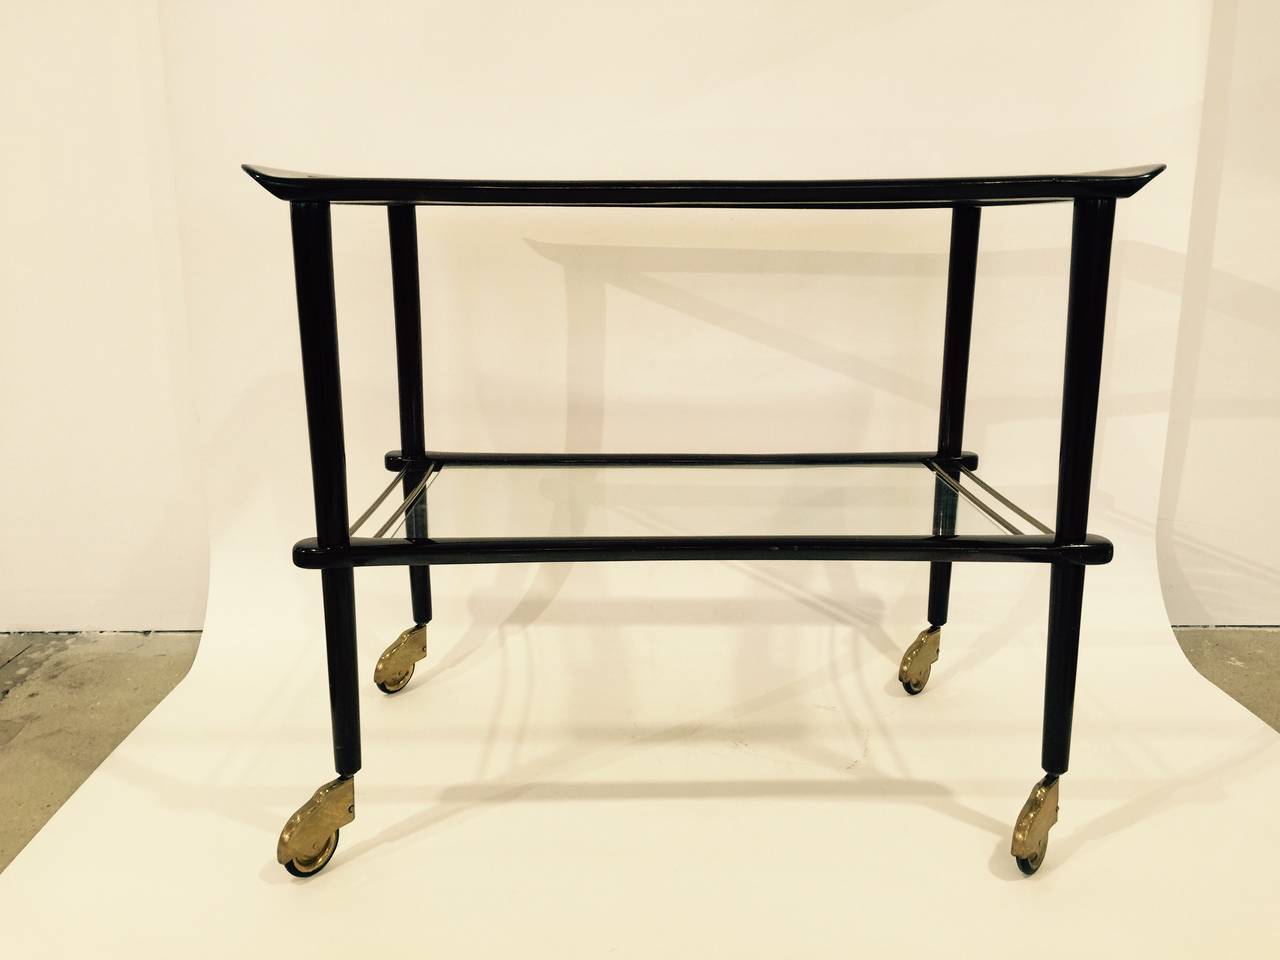 Elegant lacquered wood and glass bar cart on casters.  Italy, circa 1950.  

Originally purchased from Italian furniture dealer Gaspare Asaro.  Features dark brown lacquered finish with two shelves.  Please view our other listings for a matching set